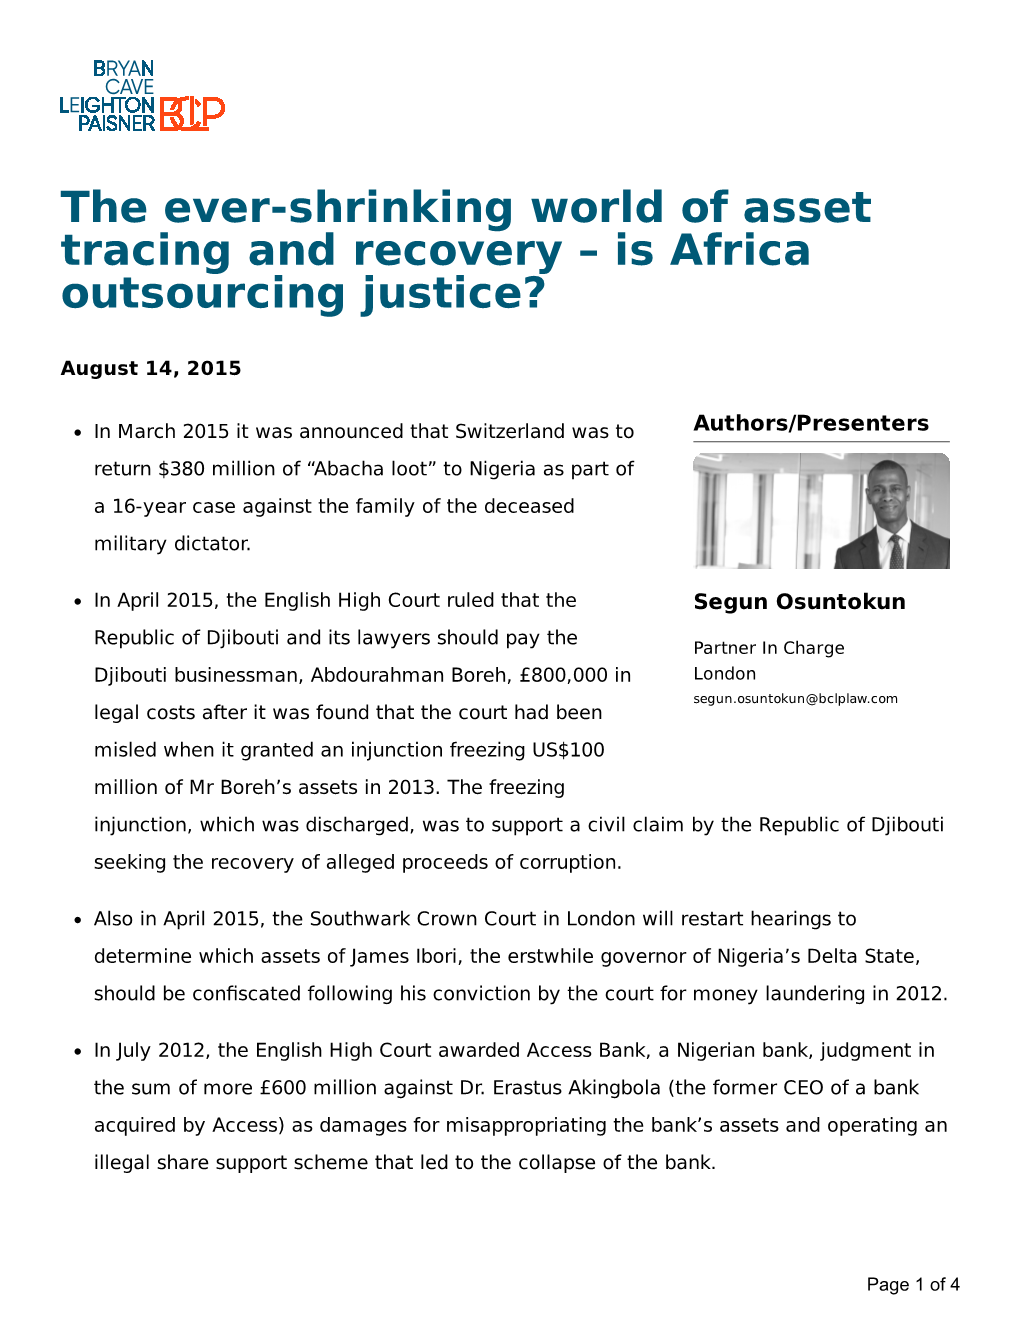 The Ever-Shrinking World of Asset Tracing and Recovery – Is Africa Outsourcing Justice?